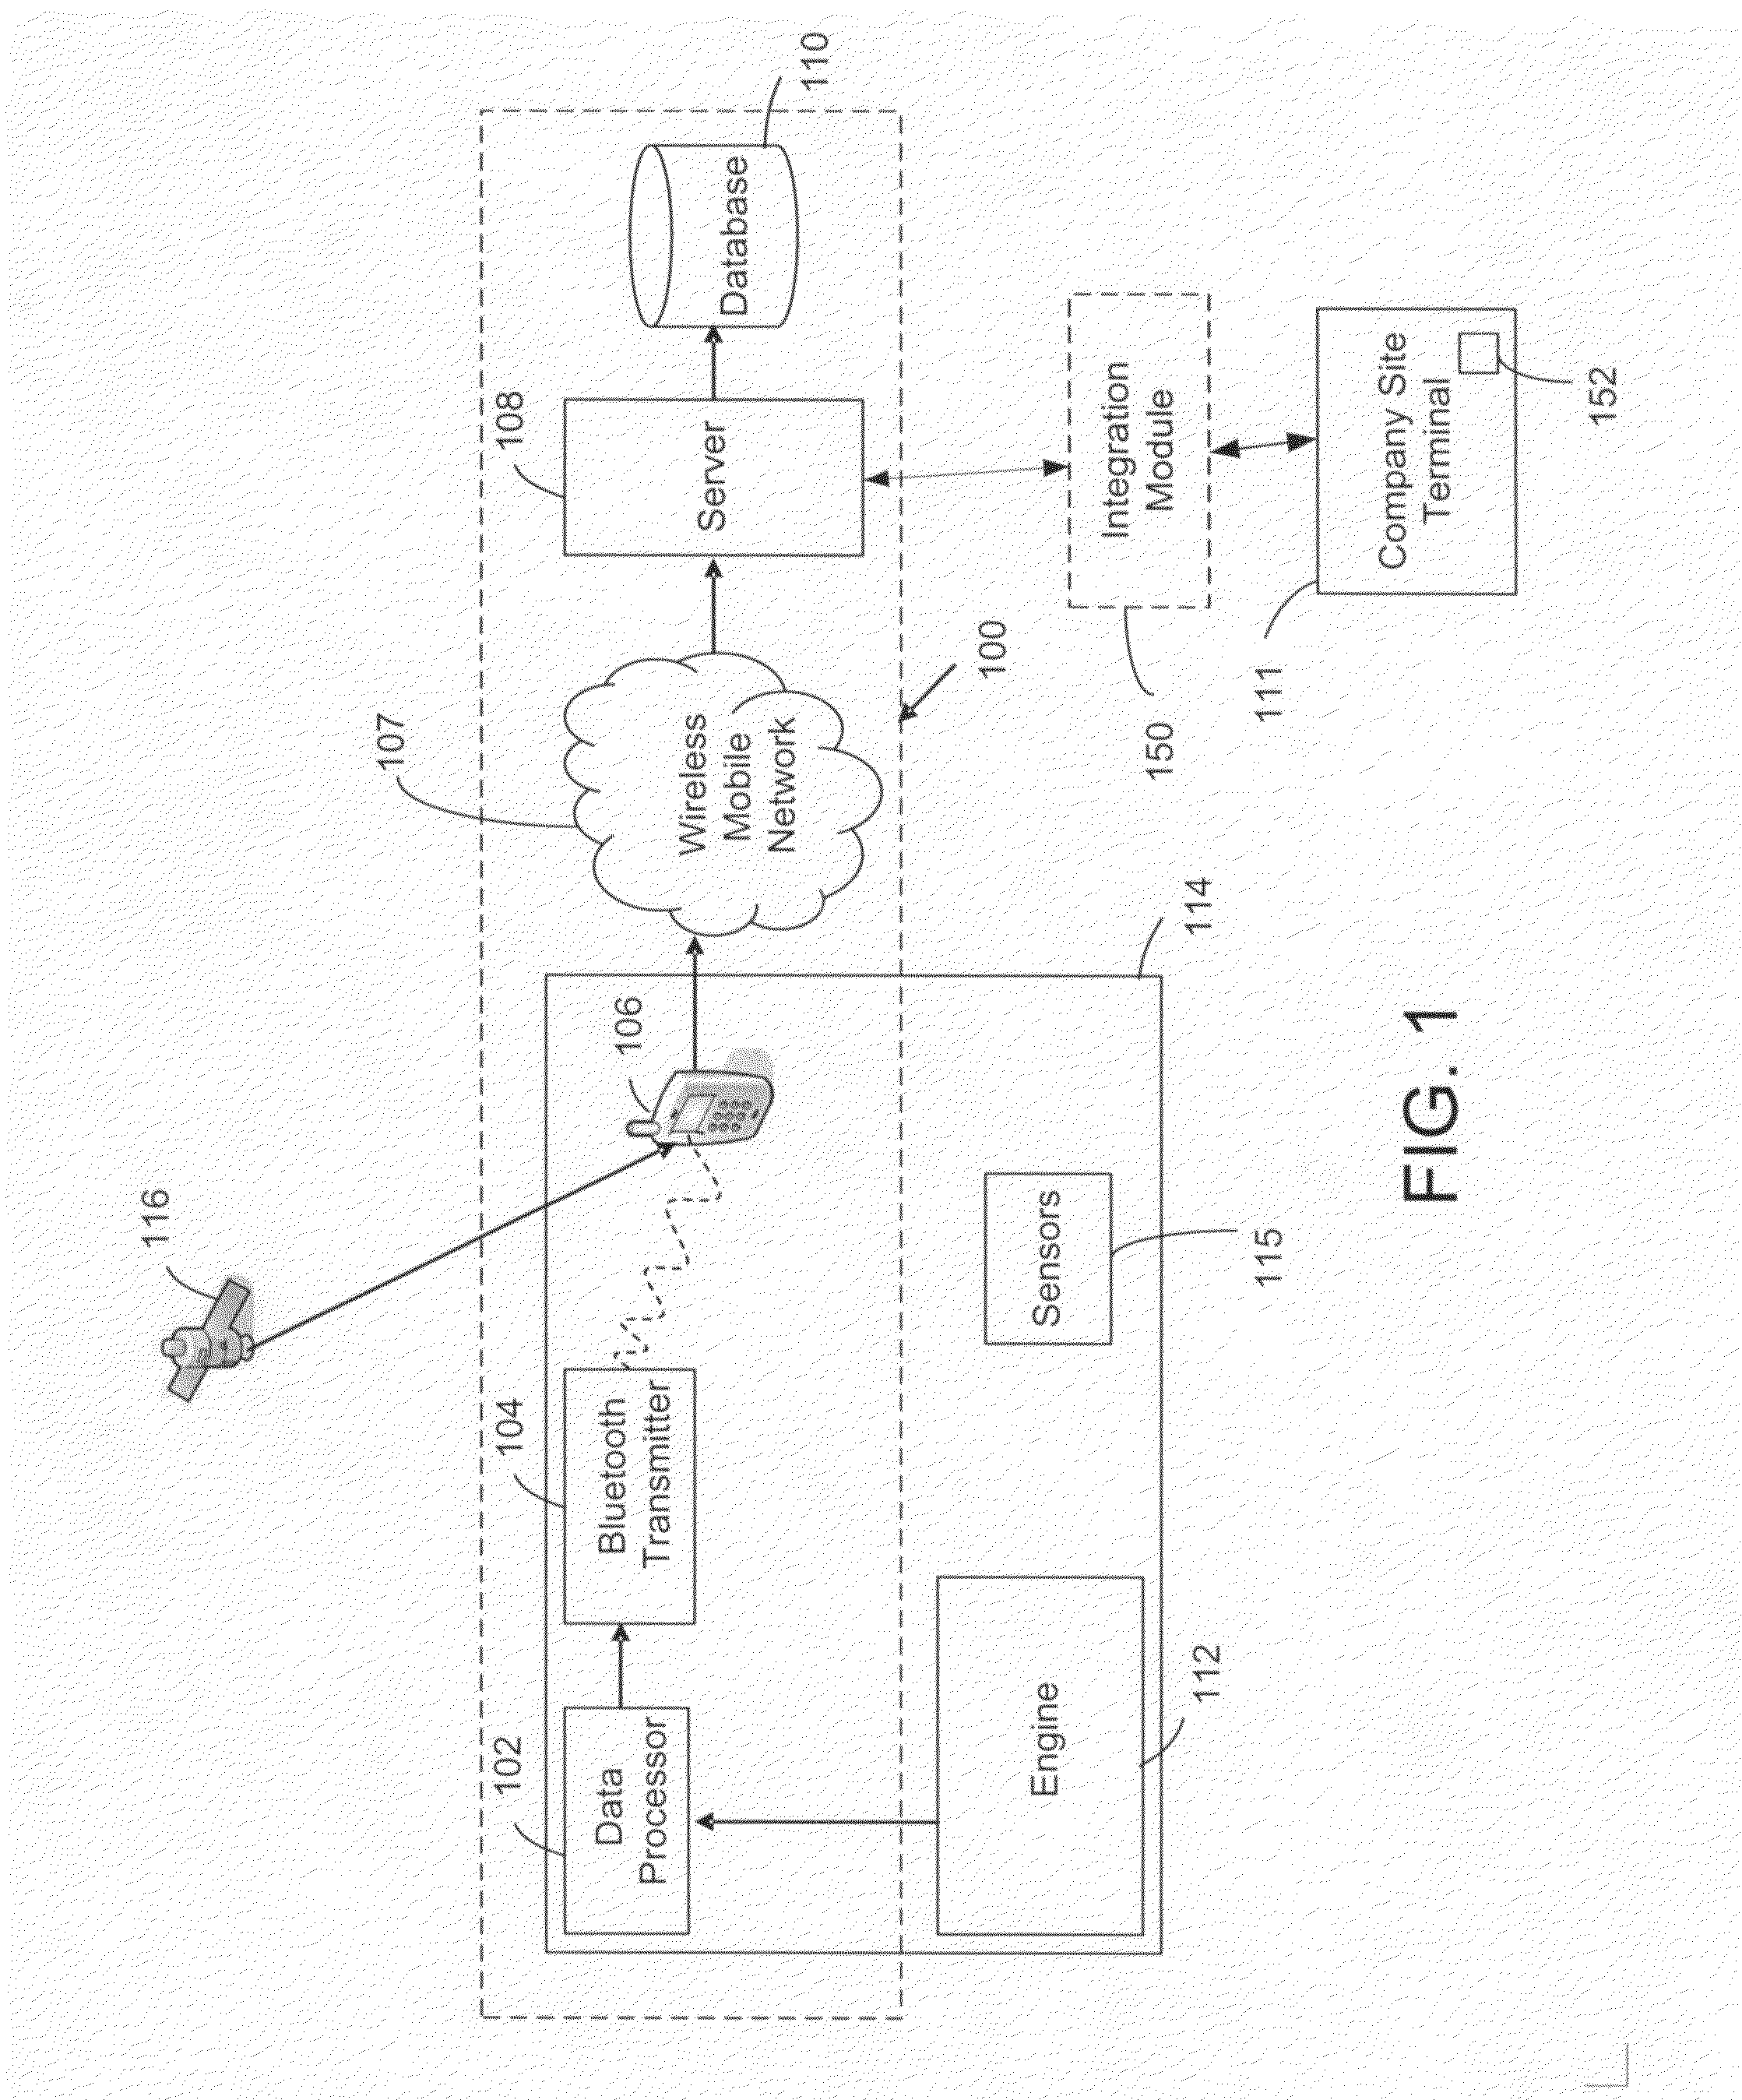 Method and apparatus for vehicle performance tracking